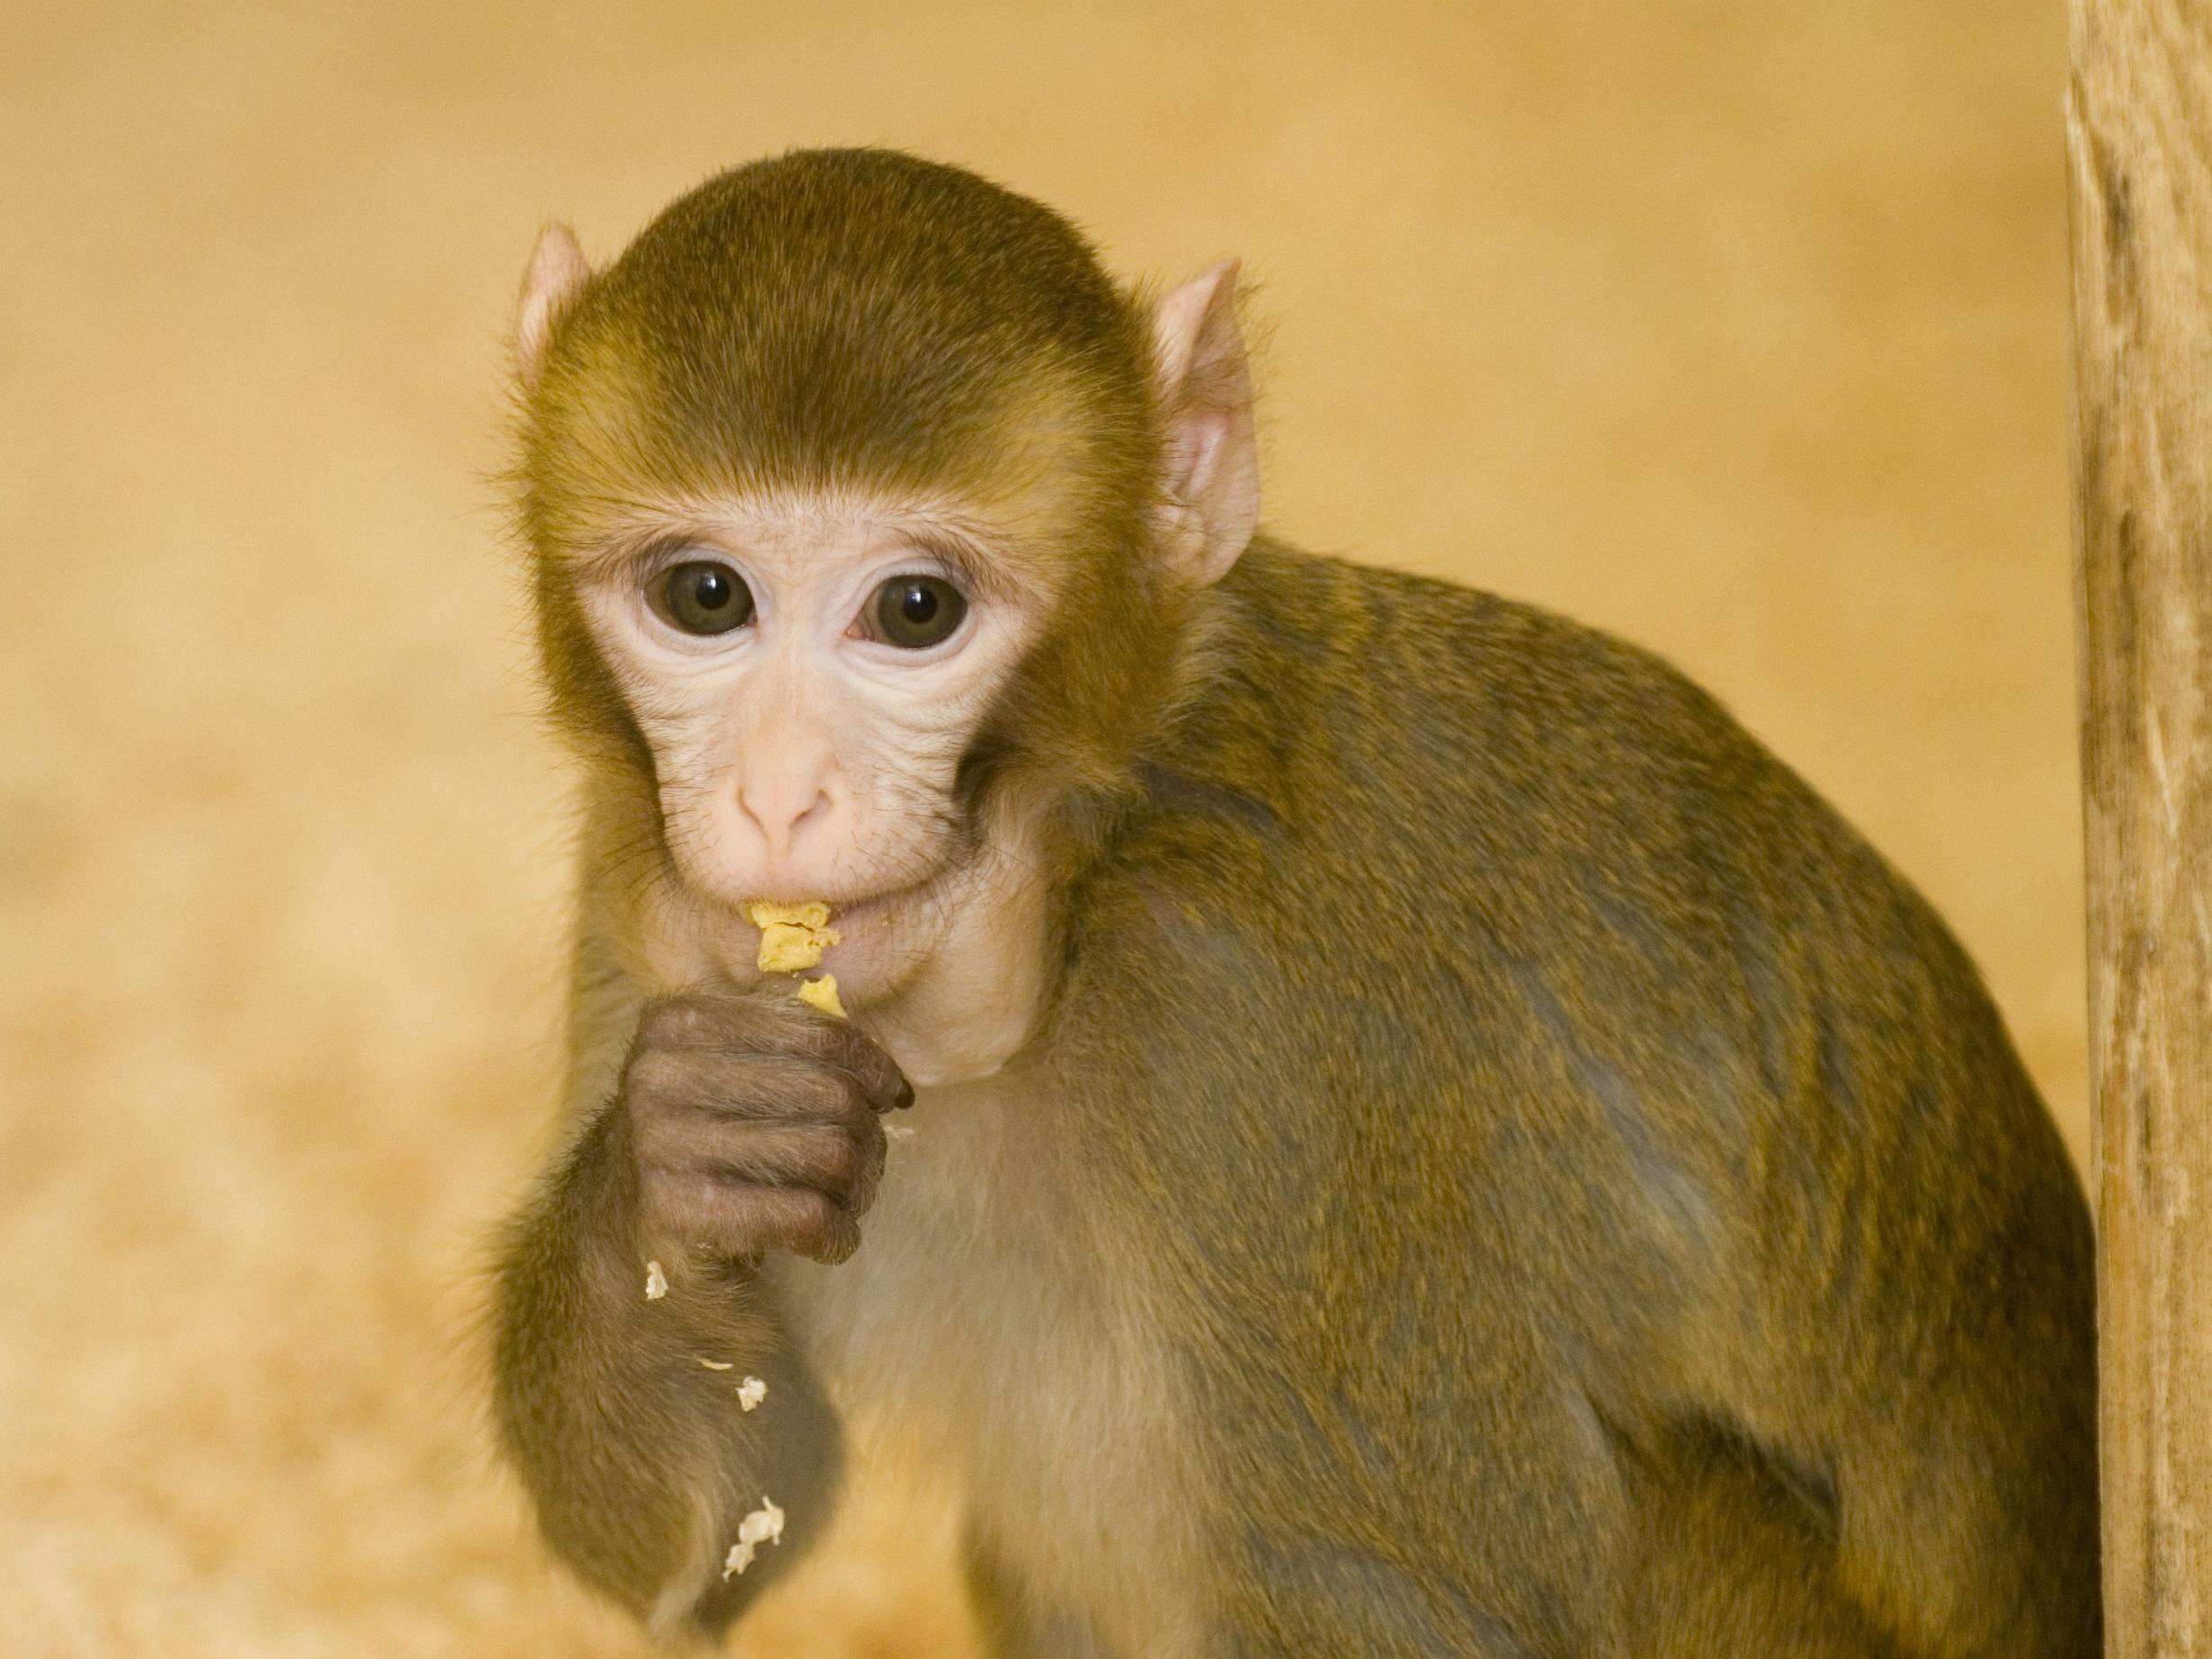 Juvenile rhesus foraging with full cheek-pouches